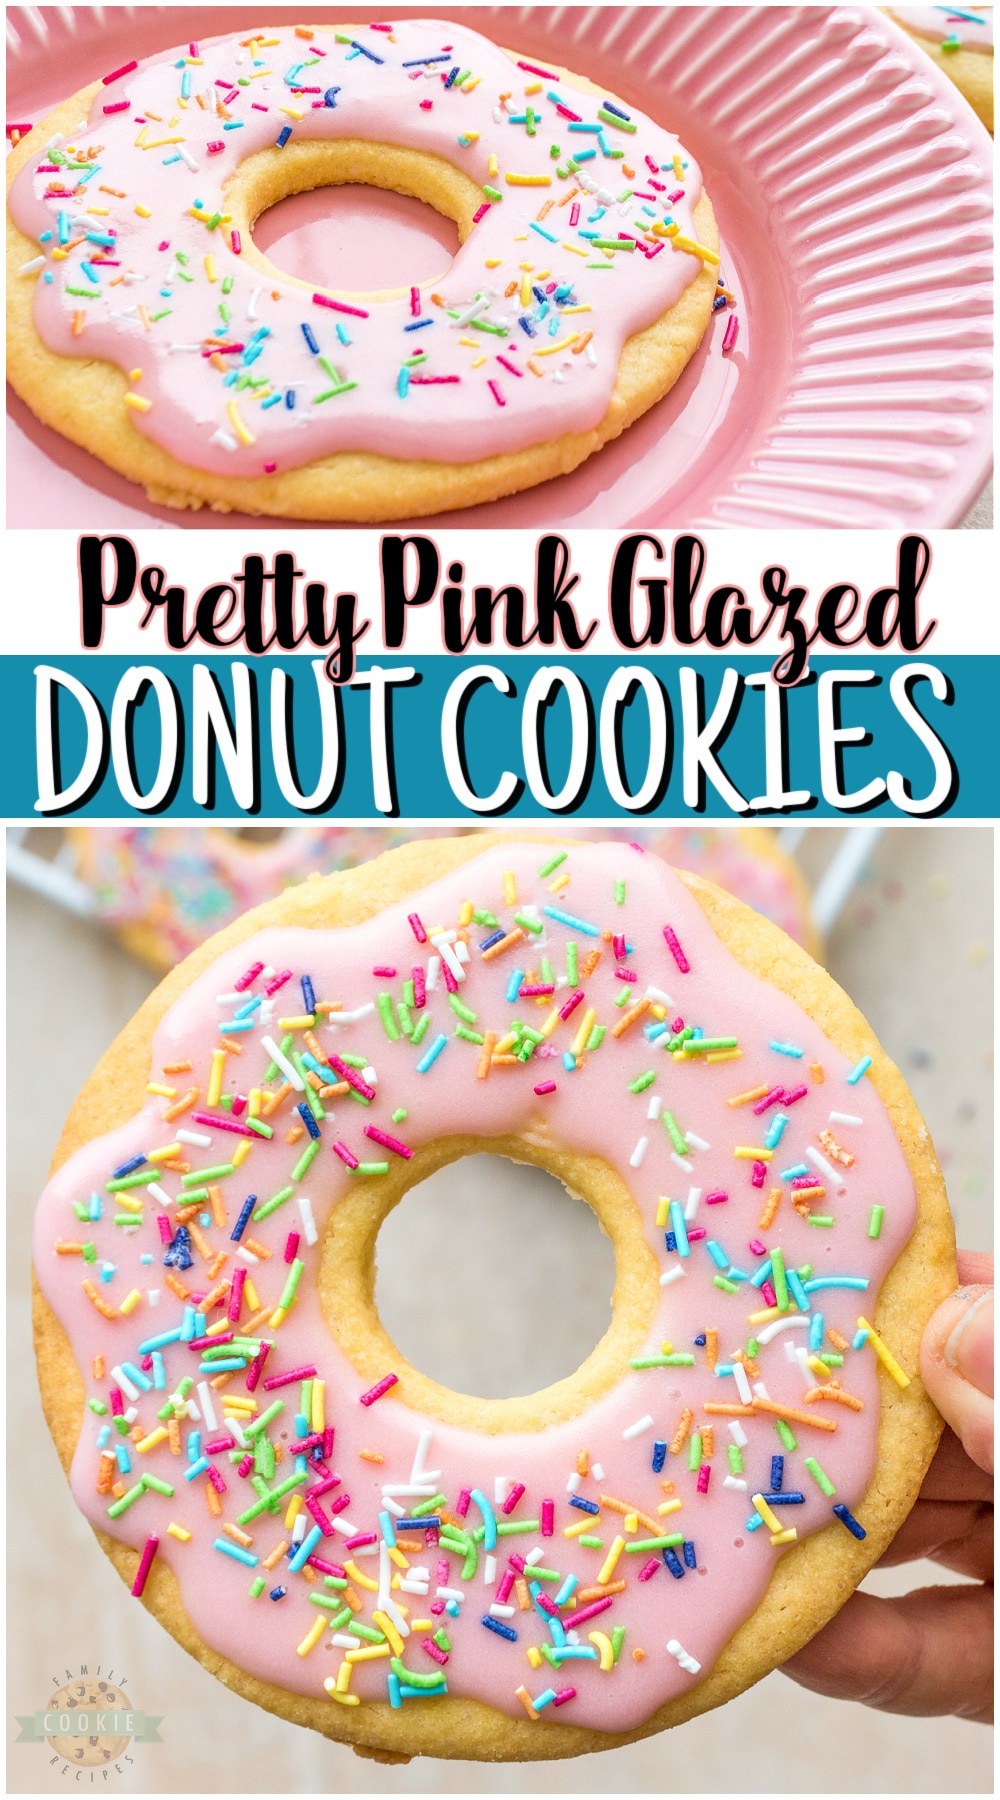 Pink donut cookies are cute sugar cookies frosted with pink glaze to look just like Sprinkled Pink Donuts! Cute donut cookies perfect for birthday parties, bridal showers, baby showers or any type of party! via @buttergirls